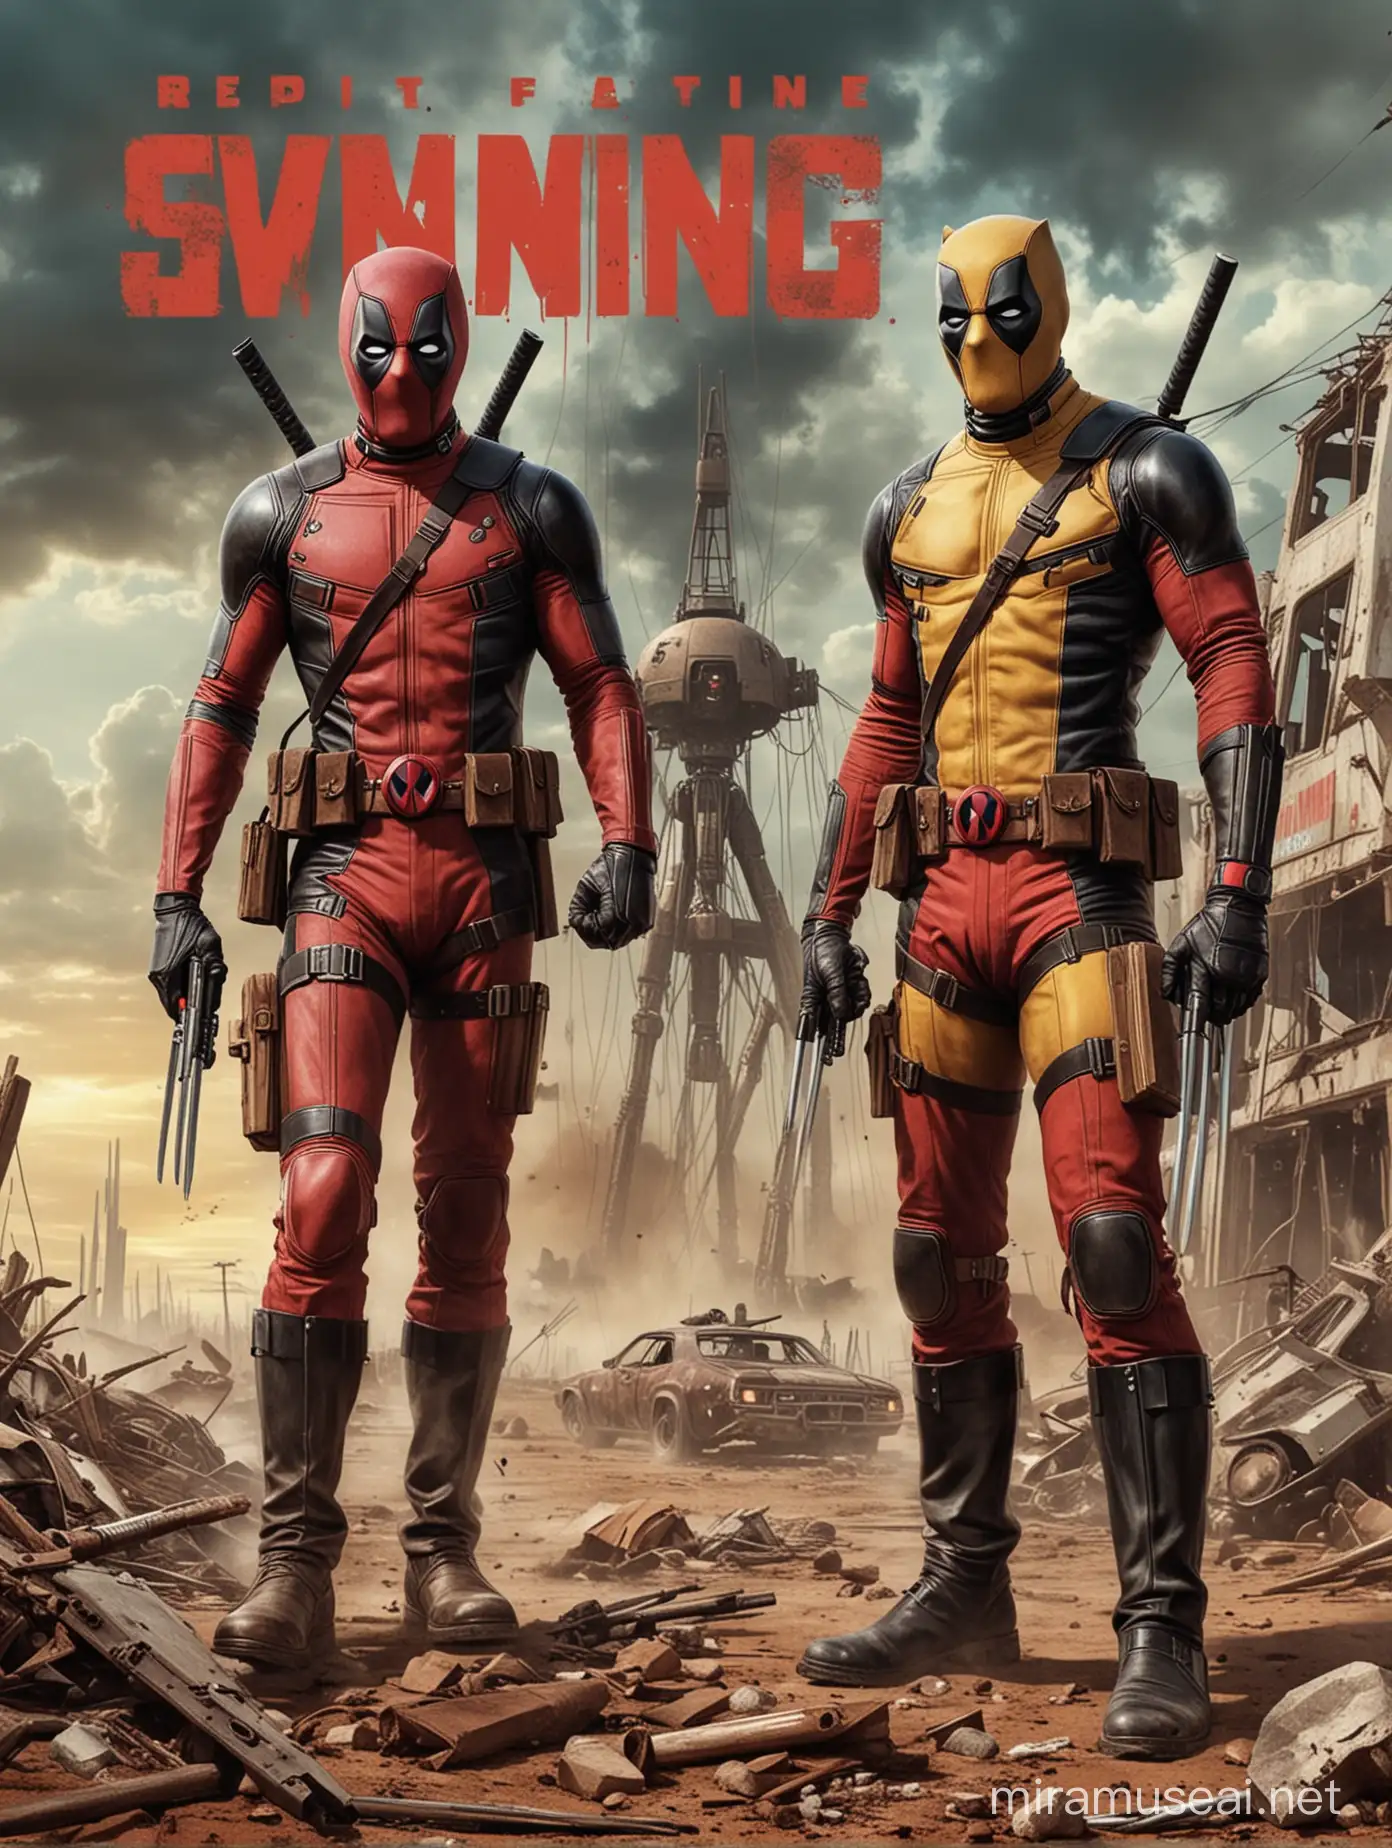 Deadpool and Wolverine in Dystopian PostApocalyptic Time Travel Battle Epic Star Wars Legend Art